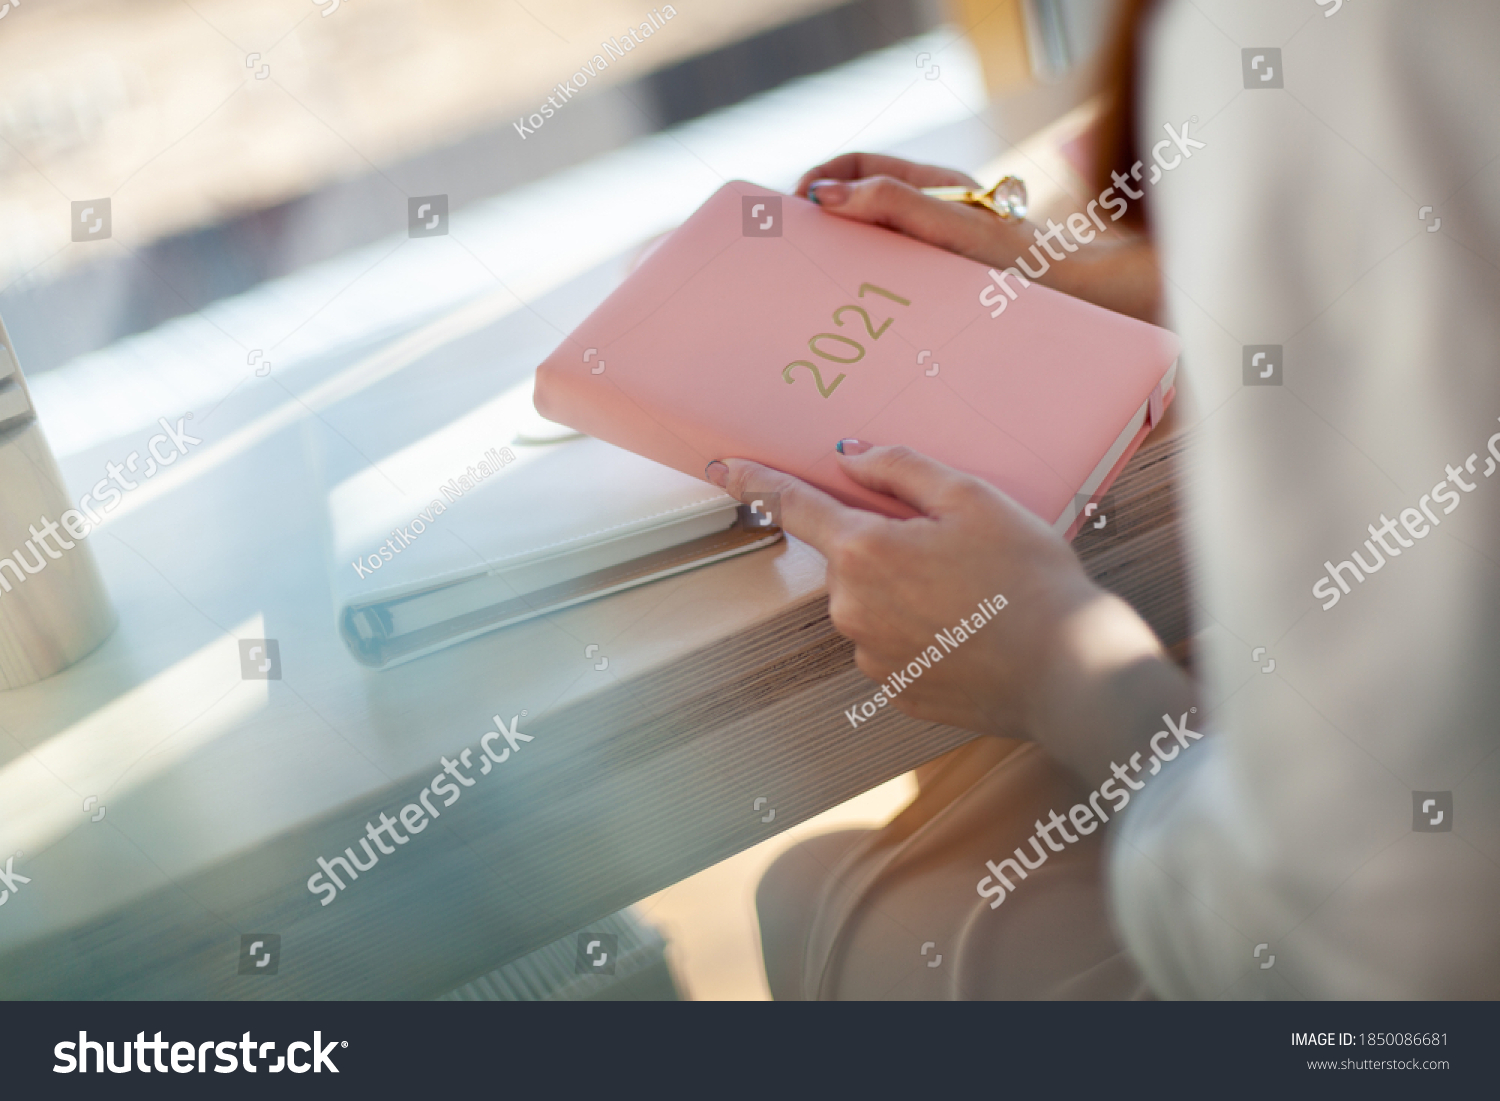 Female hands holding pink or coral coloured leather diary 2021 and pen while sitting near a window Concept of planning personal future goals and ideas for new year 2021. Copy space. #1850086681